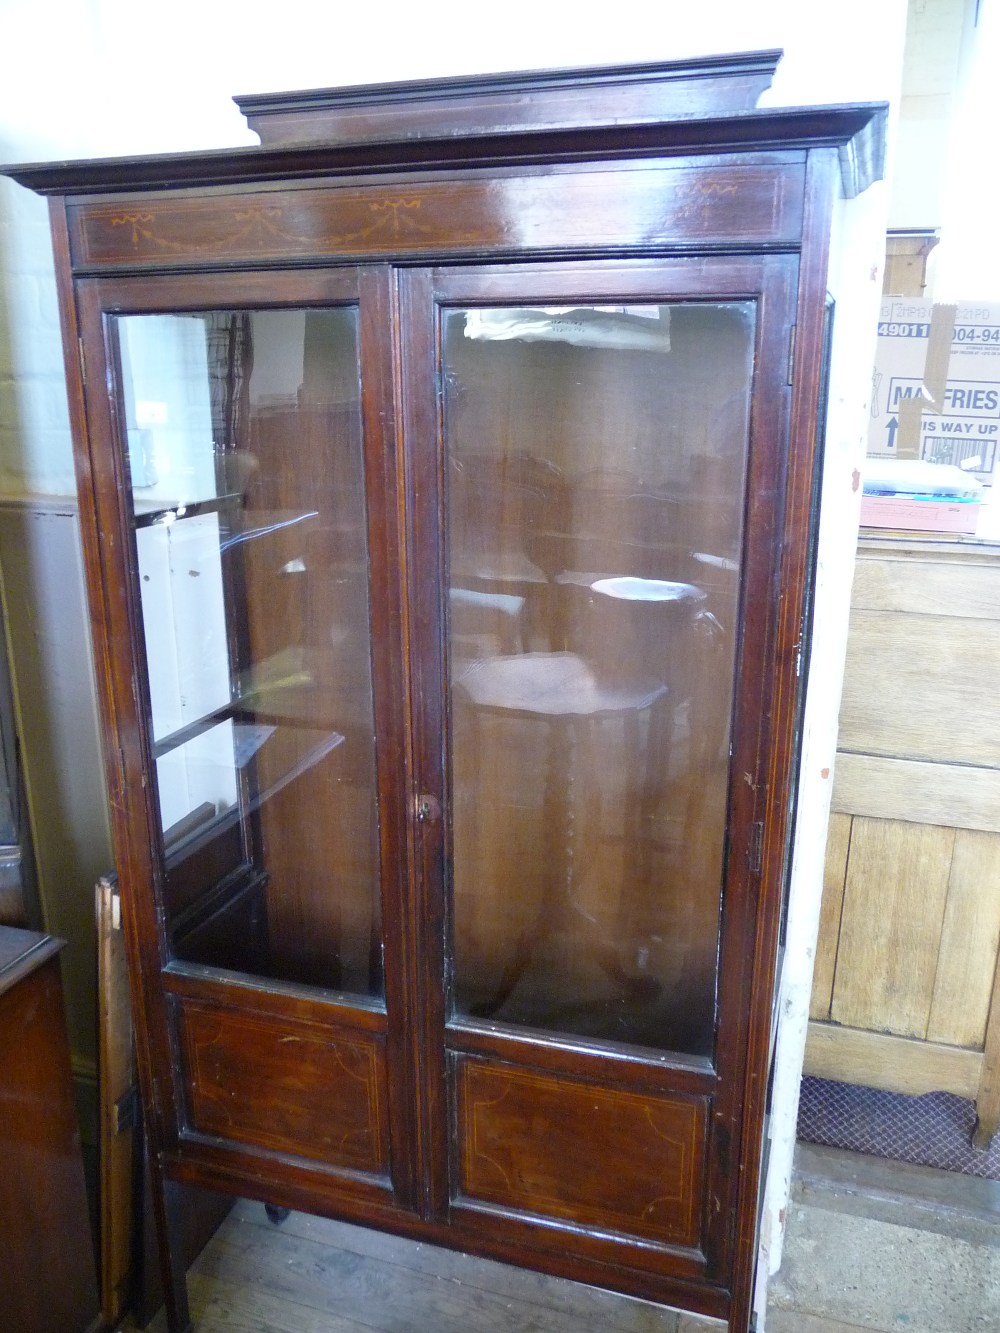 An Edwardian inlaid display cabinet, a small Oak table, profusely carved with leaves and a bedside